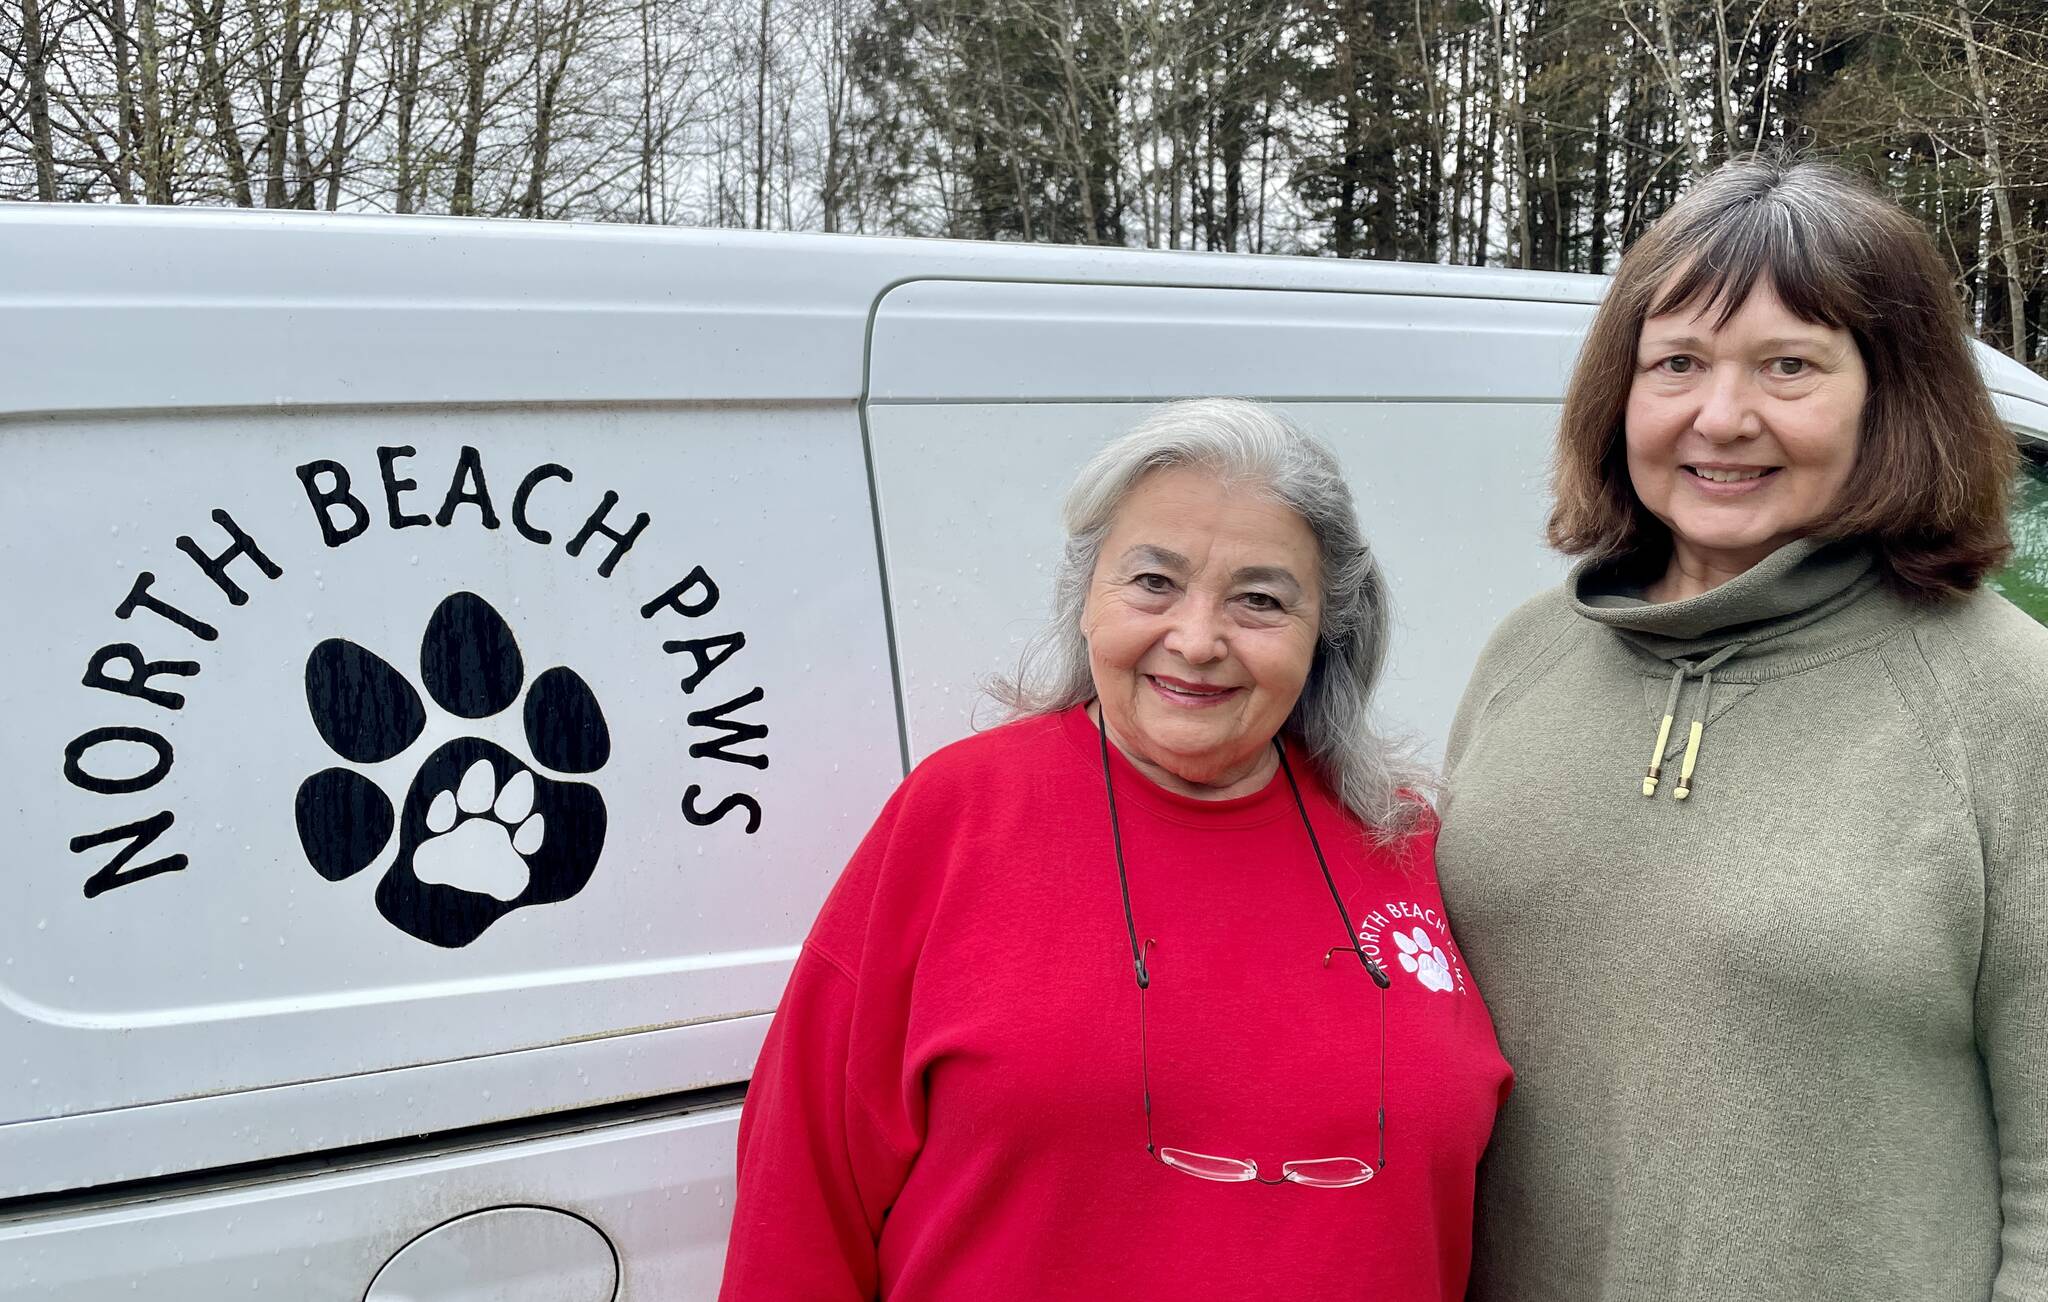 Carol Jamroz, right, will take over as president of North Beach PAWS from Lorna Valdez, left, who helped found and shape the shelter. (Michael S. Lockett / The Daily World)